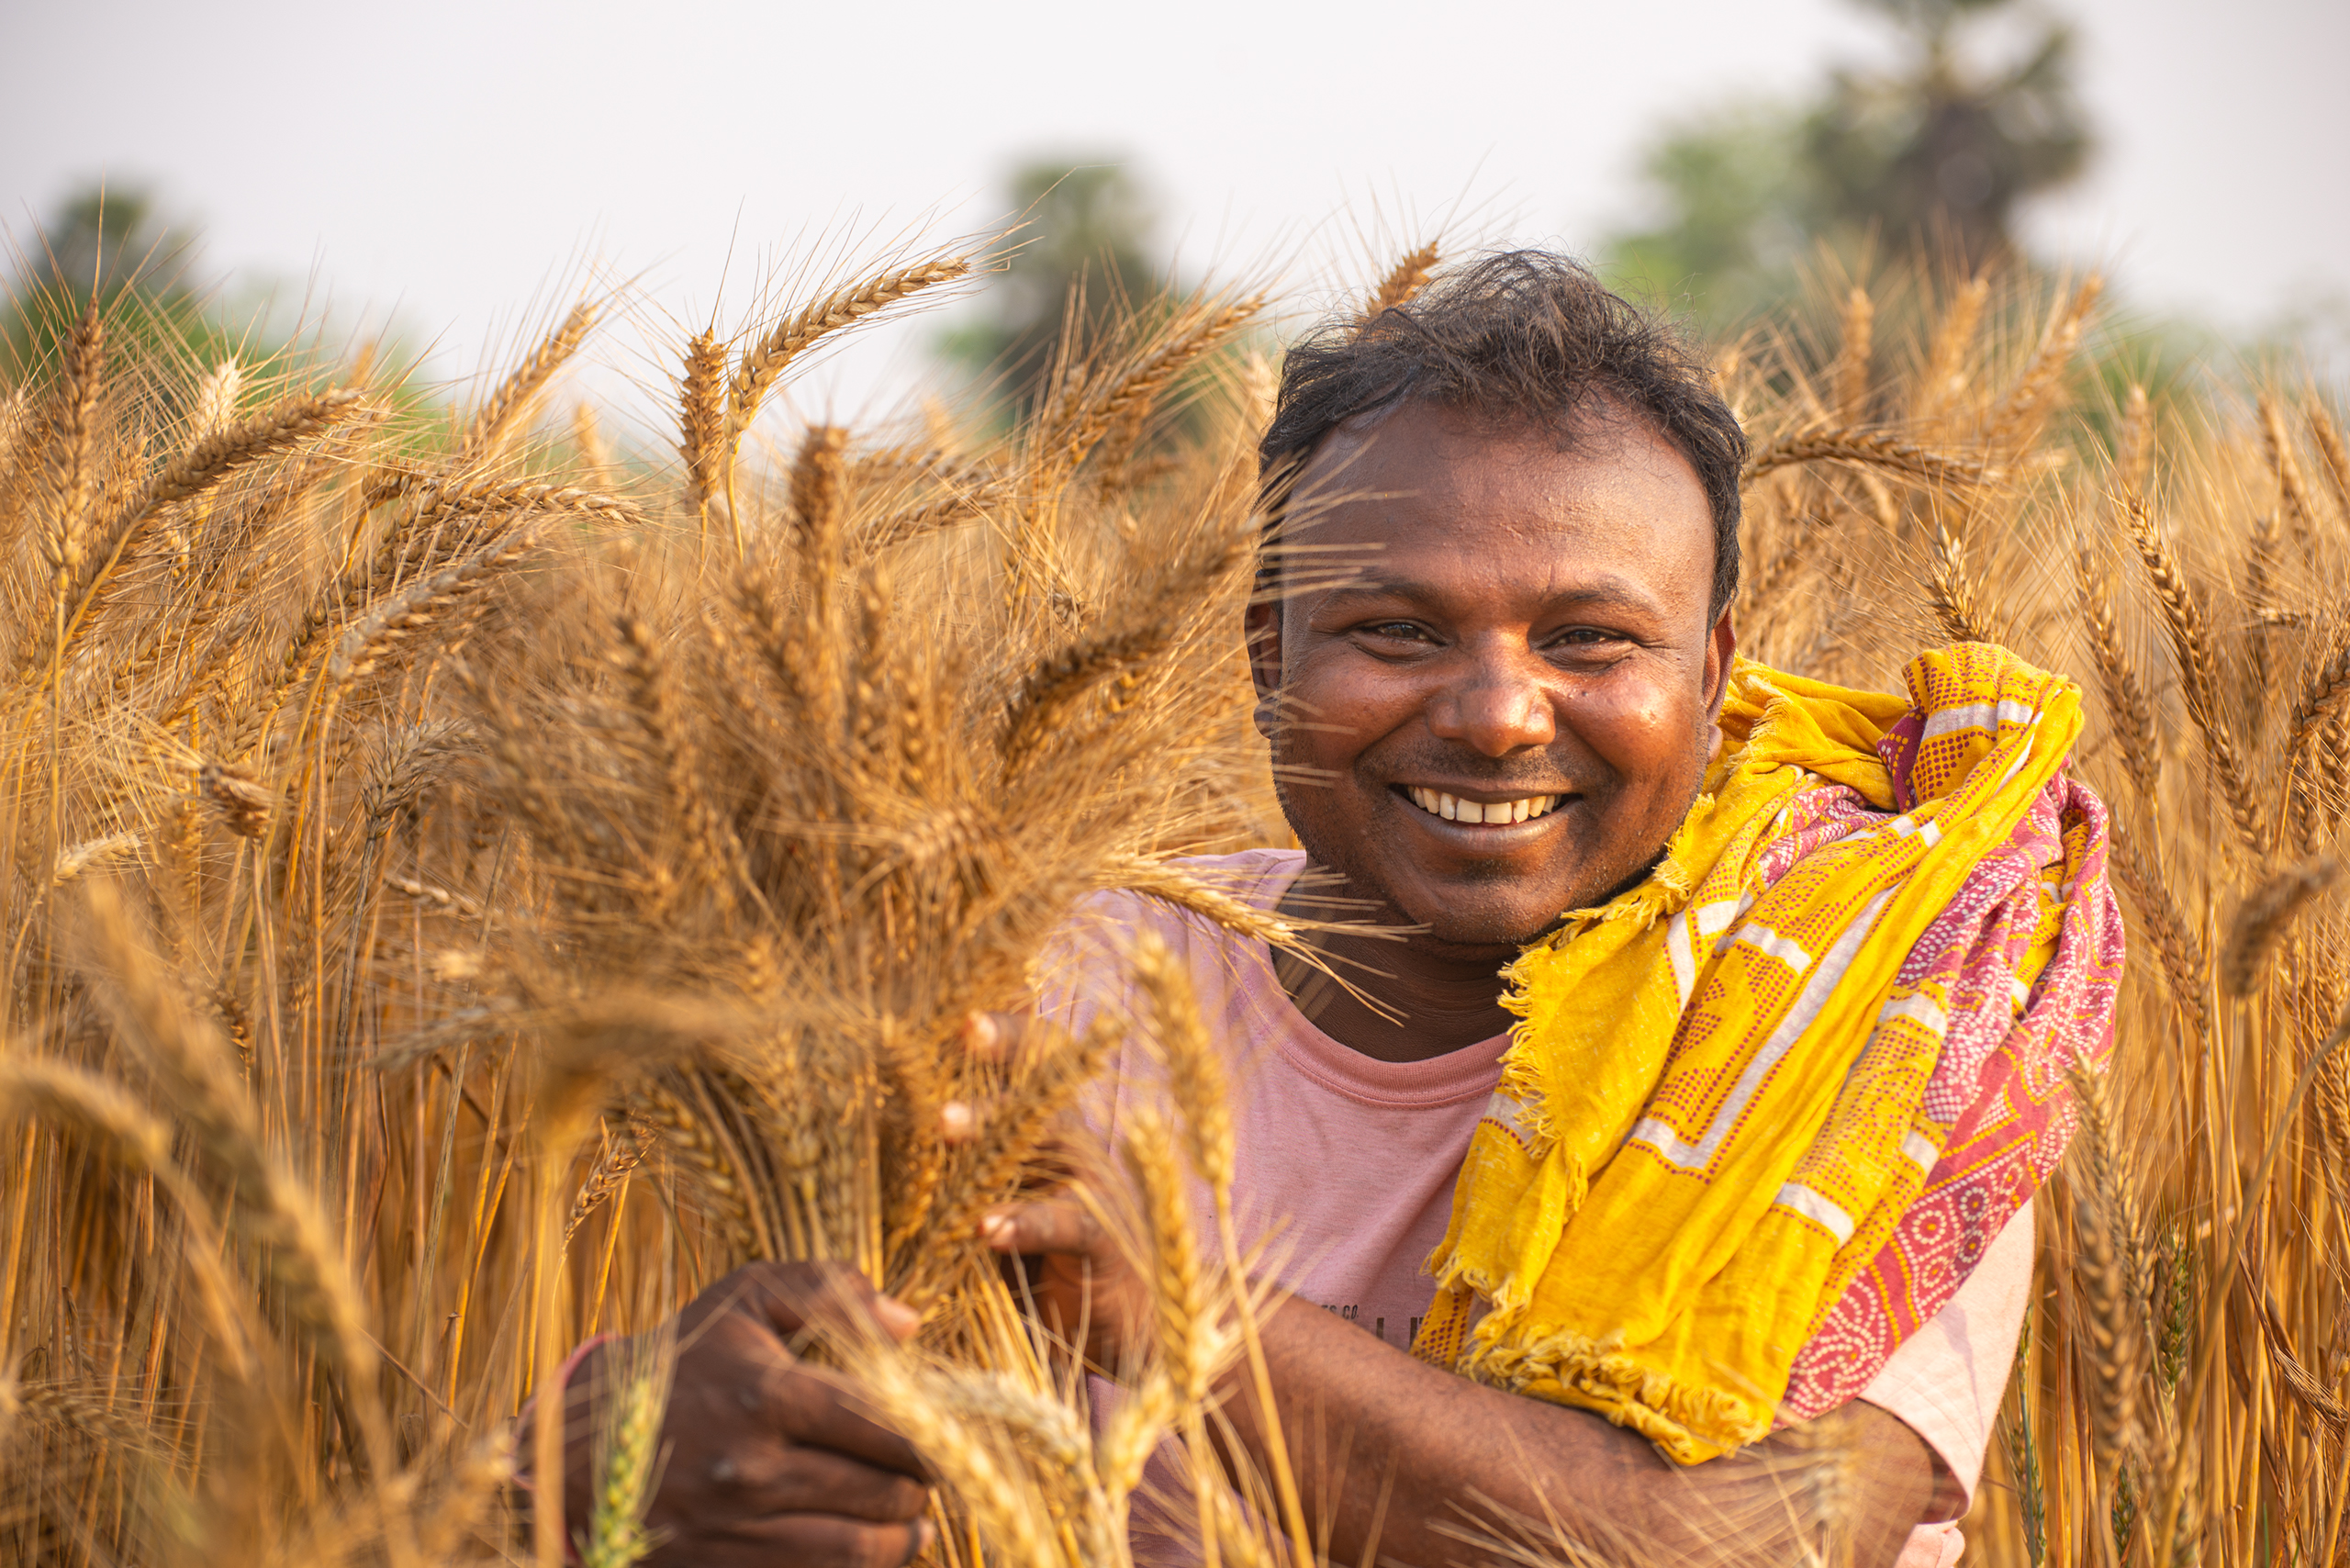 India’s farmers feed billions of people, while fighting pest and weather related uncertainties. Is it too much to ask them to change their behavior and help support air quality with the food they grow? (Photo: Dakshinamurthy Vedachalam/CIMMYT)